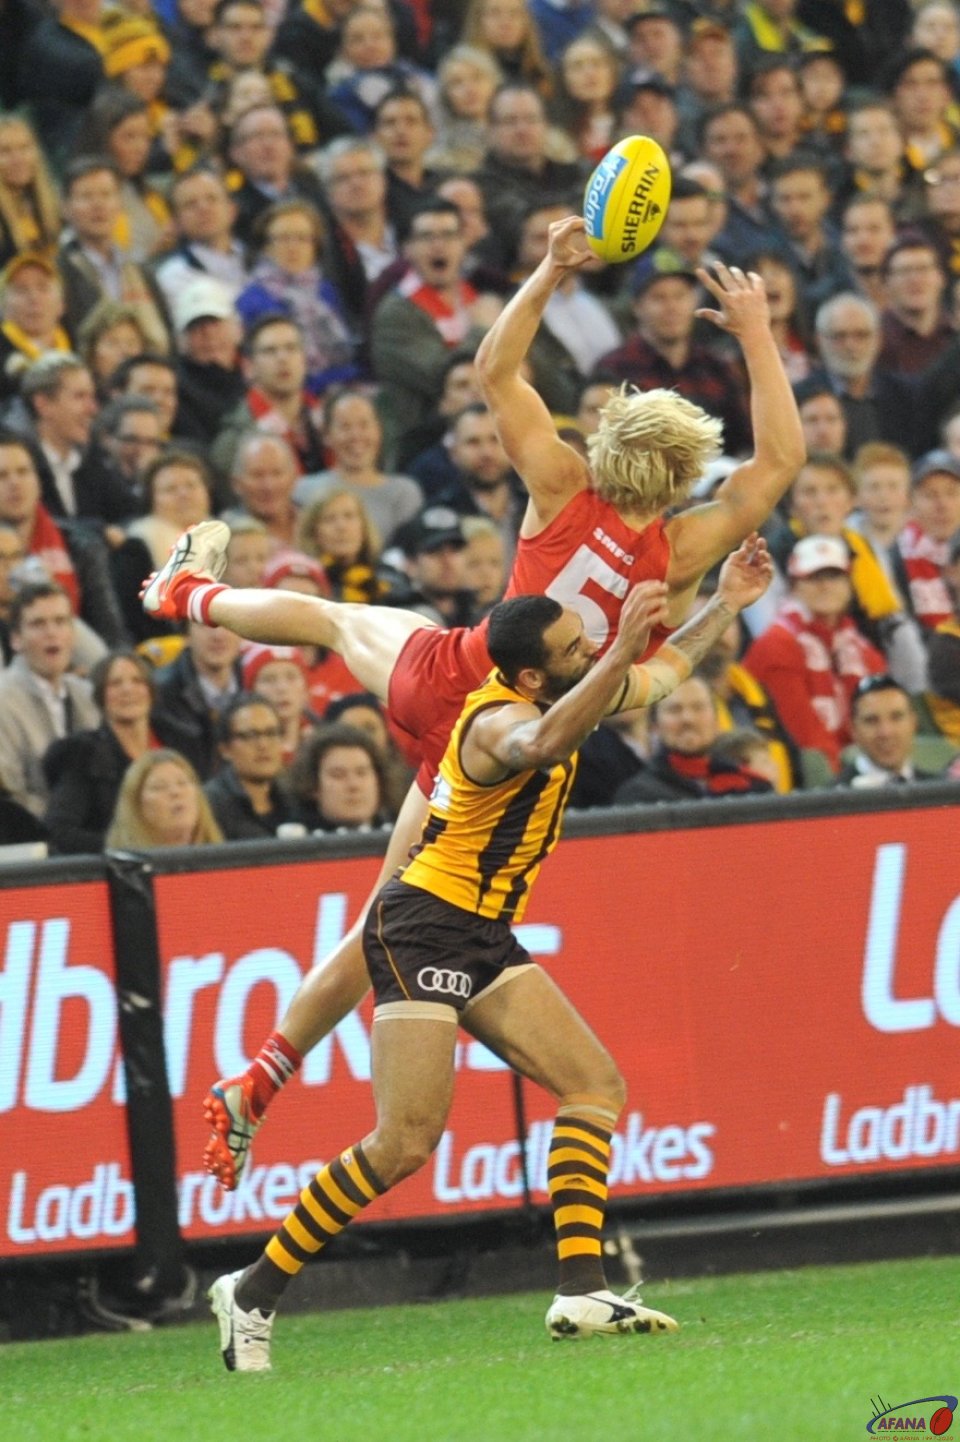 Heeney wins a free kick afetr Burgoyne clumsy tunnelling